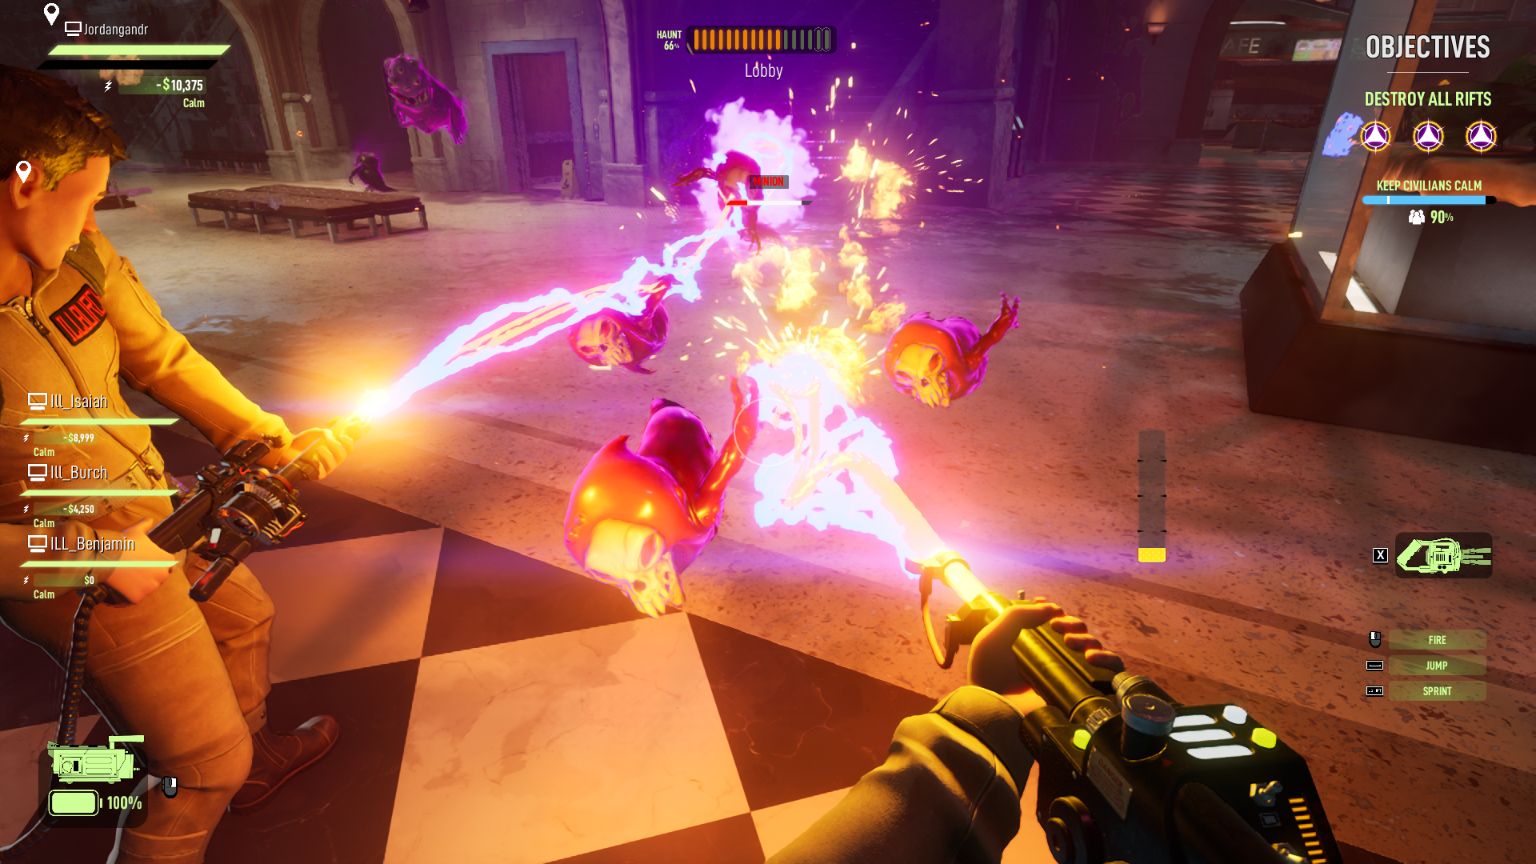 PS4 Ghostbusters: Spirits Unleashed